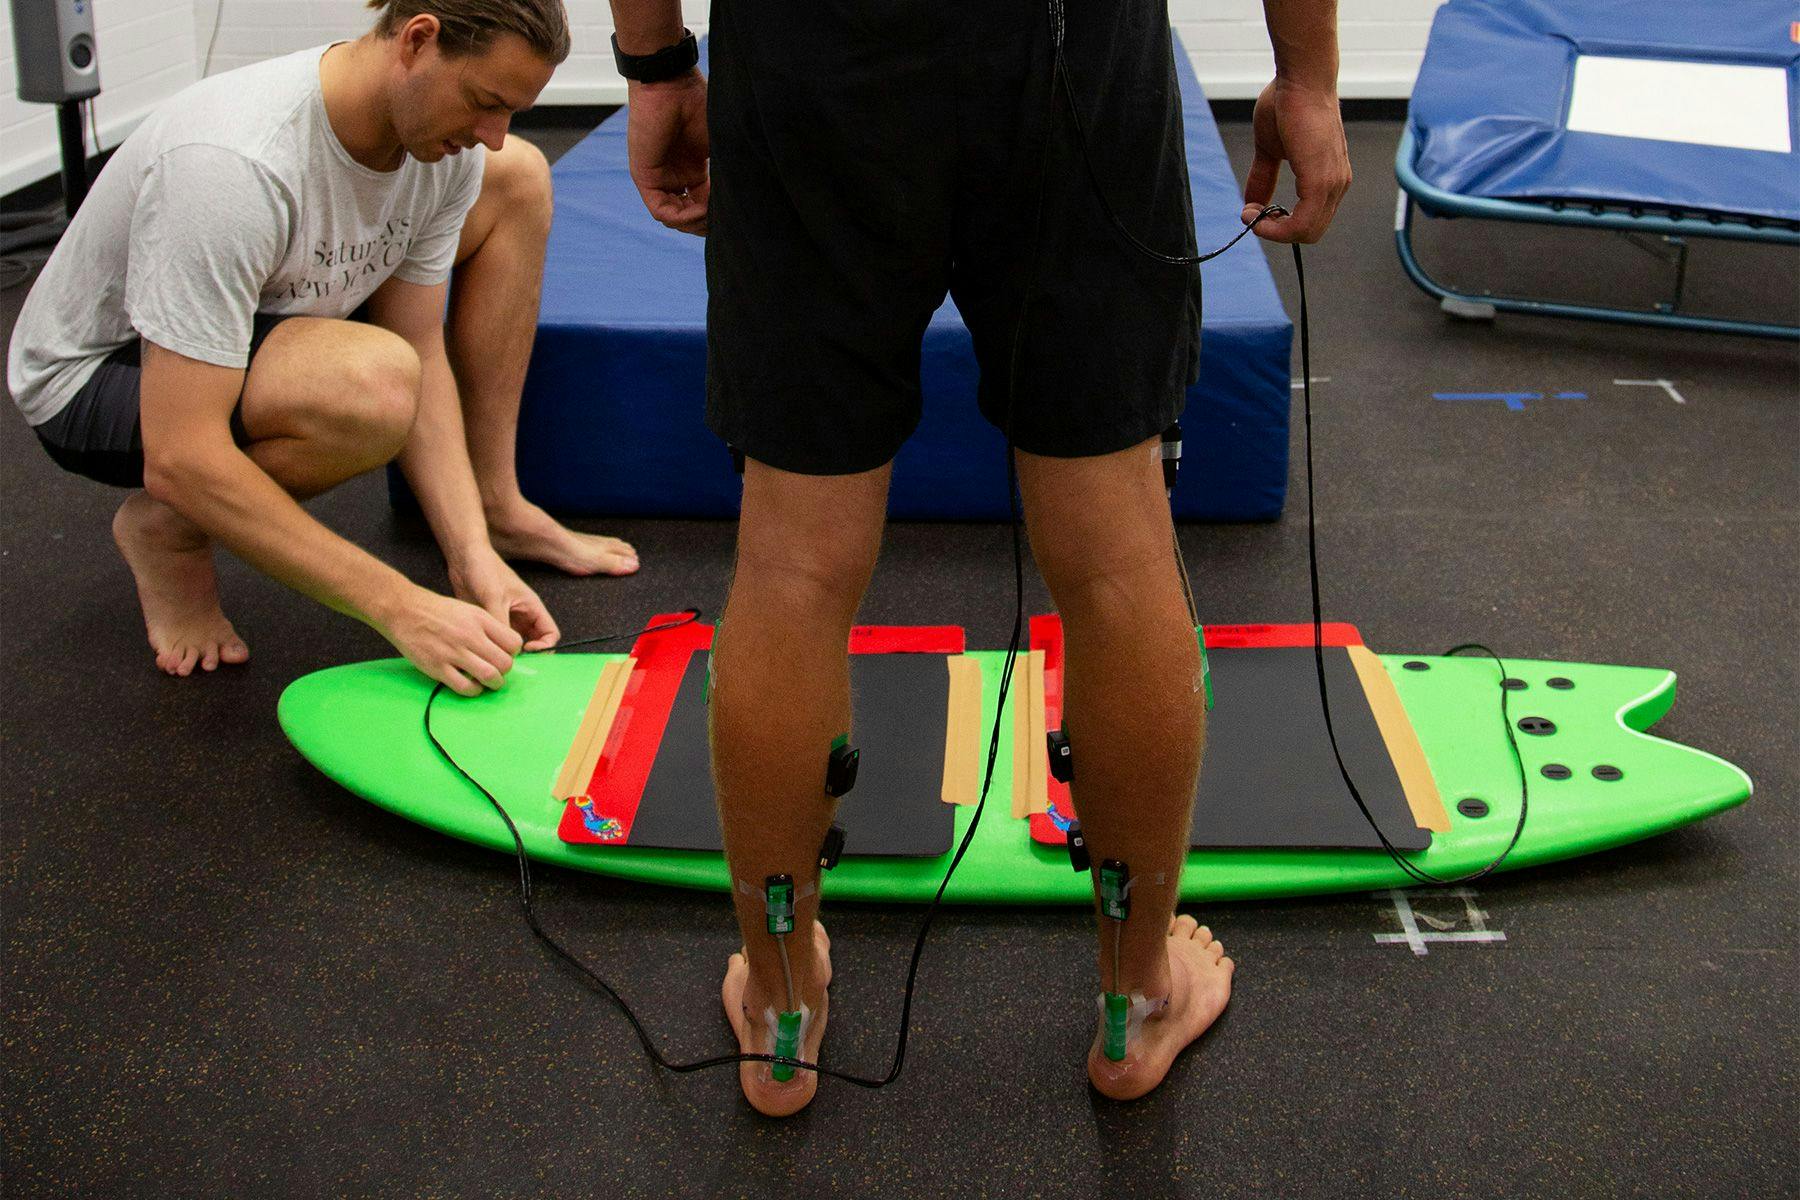 sensors attached to the ankle of a surfer in a laboratory to measure the load when performing aerials